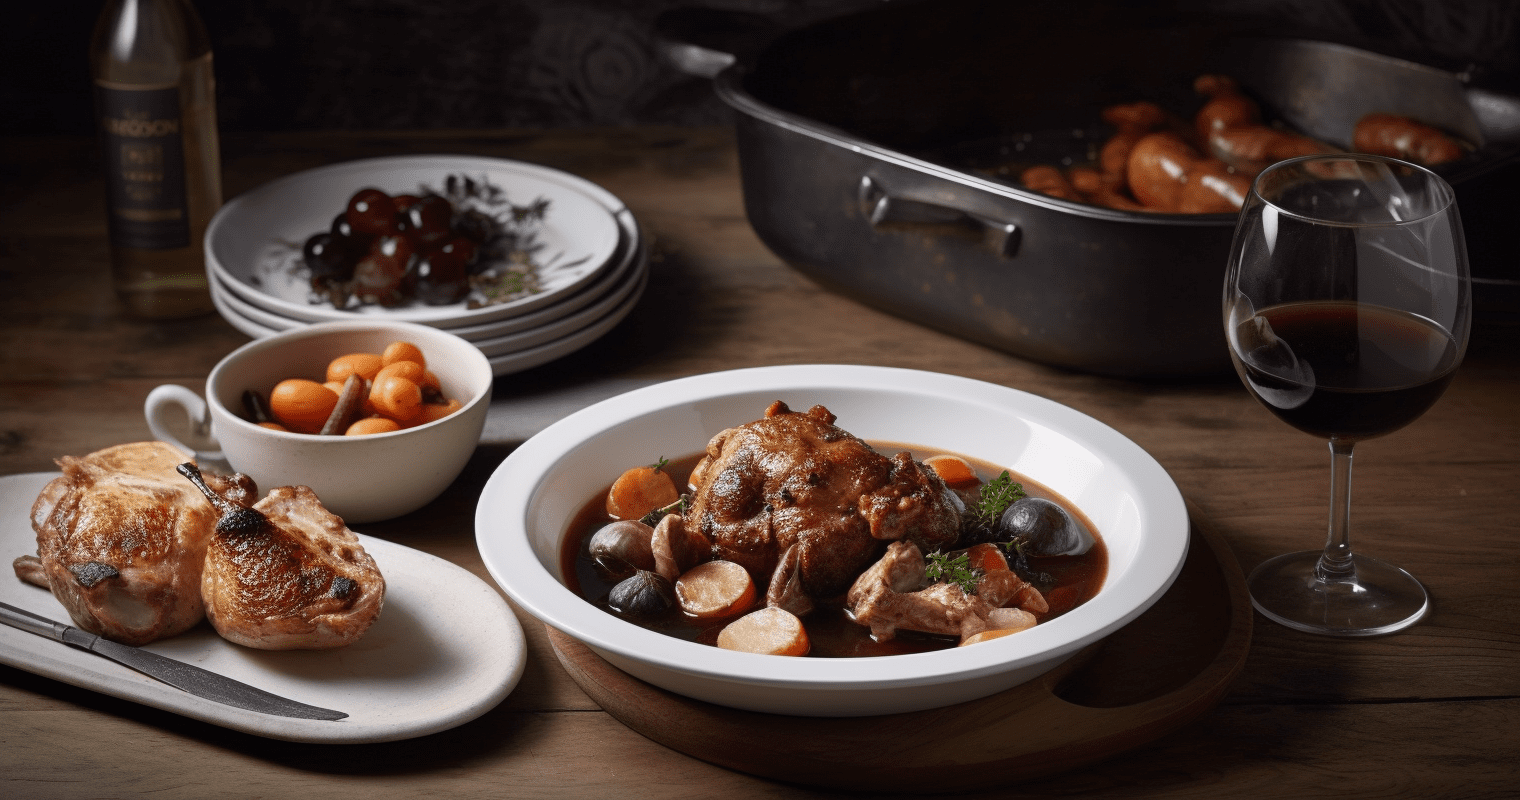 The Rich History and Flavor of Coq au Vin